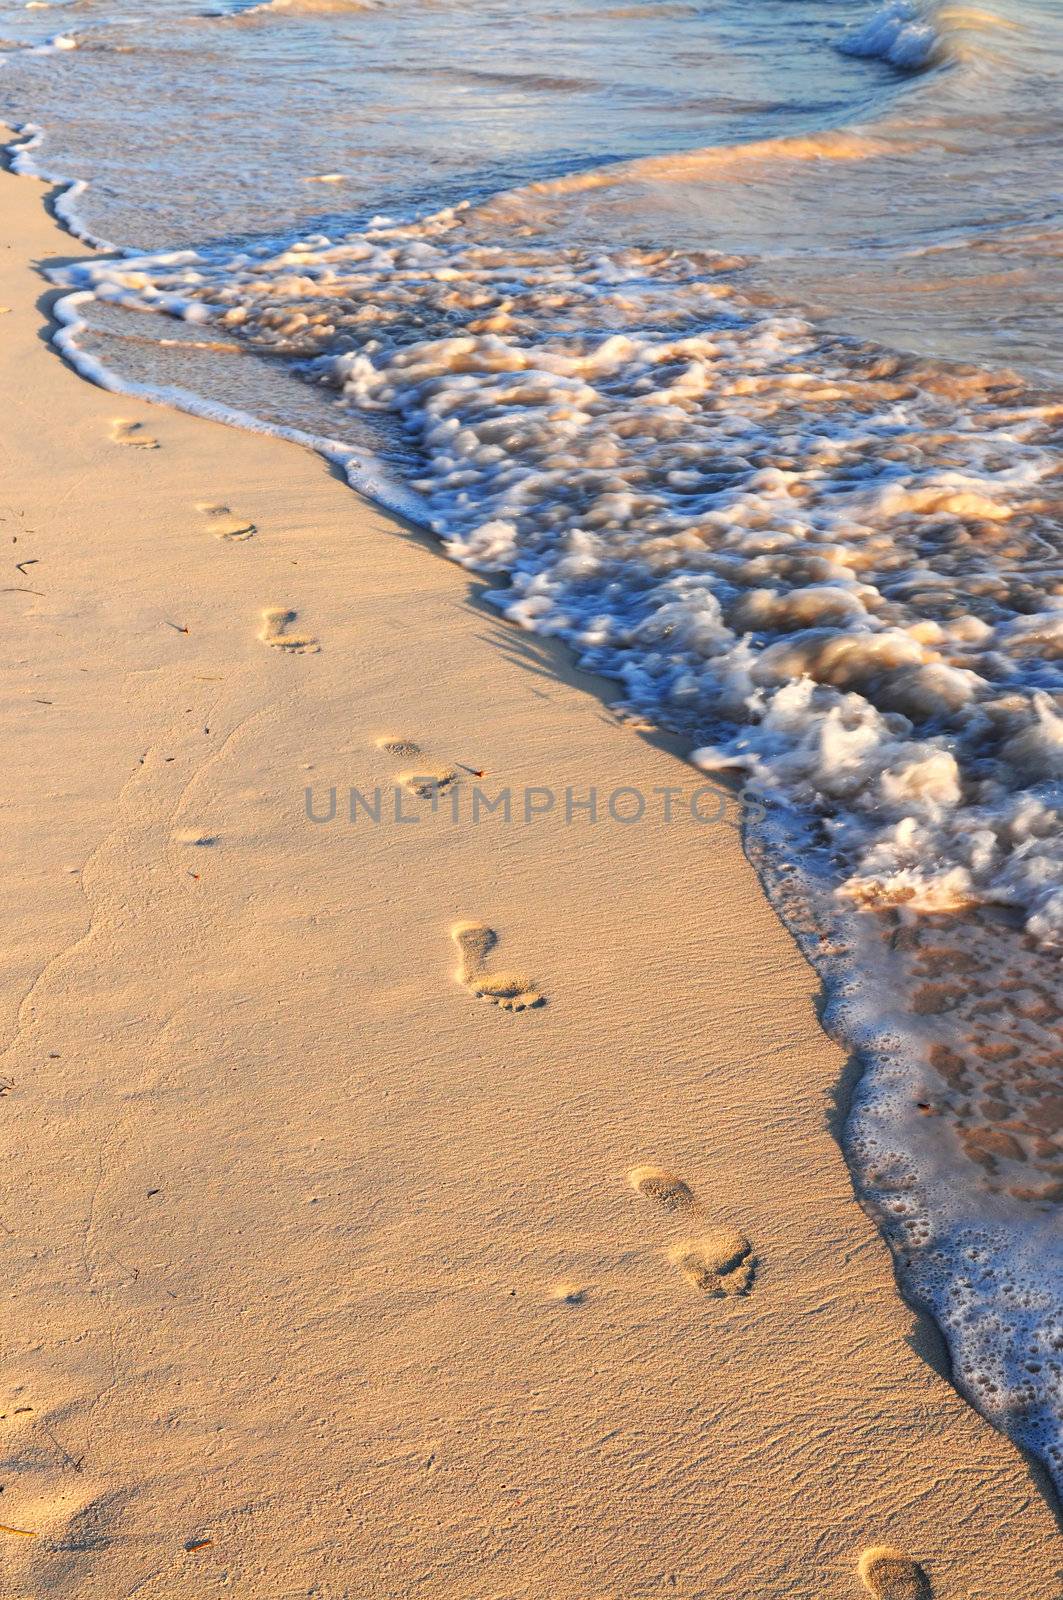 Footprints on sandy tropical beach washed away by waves